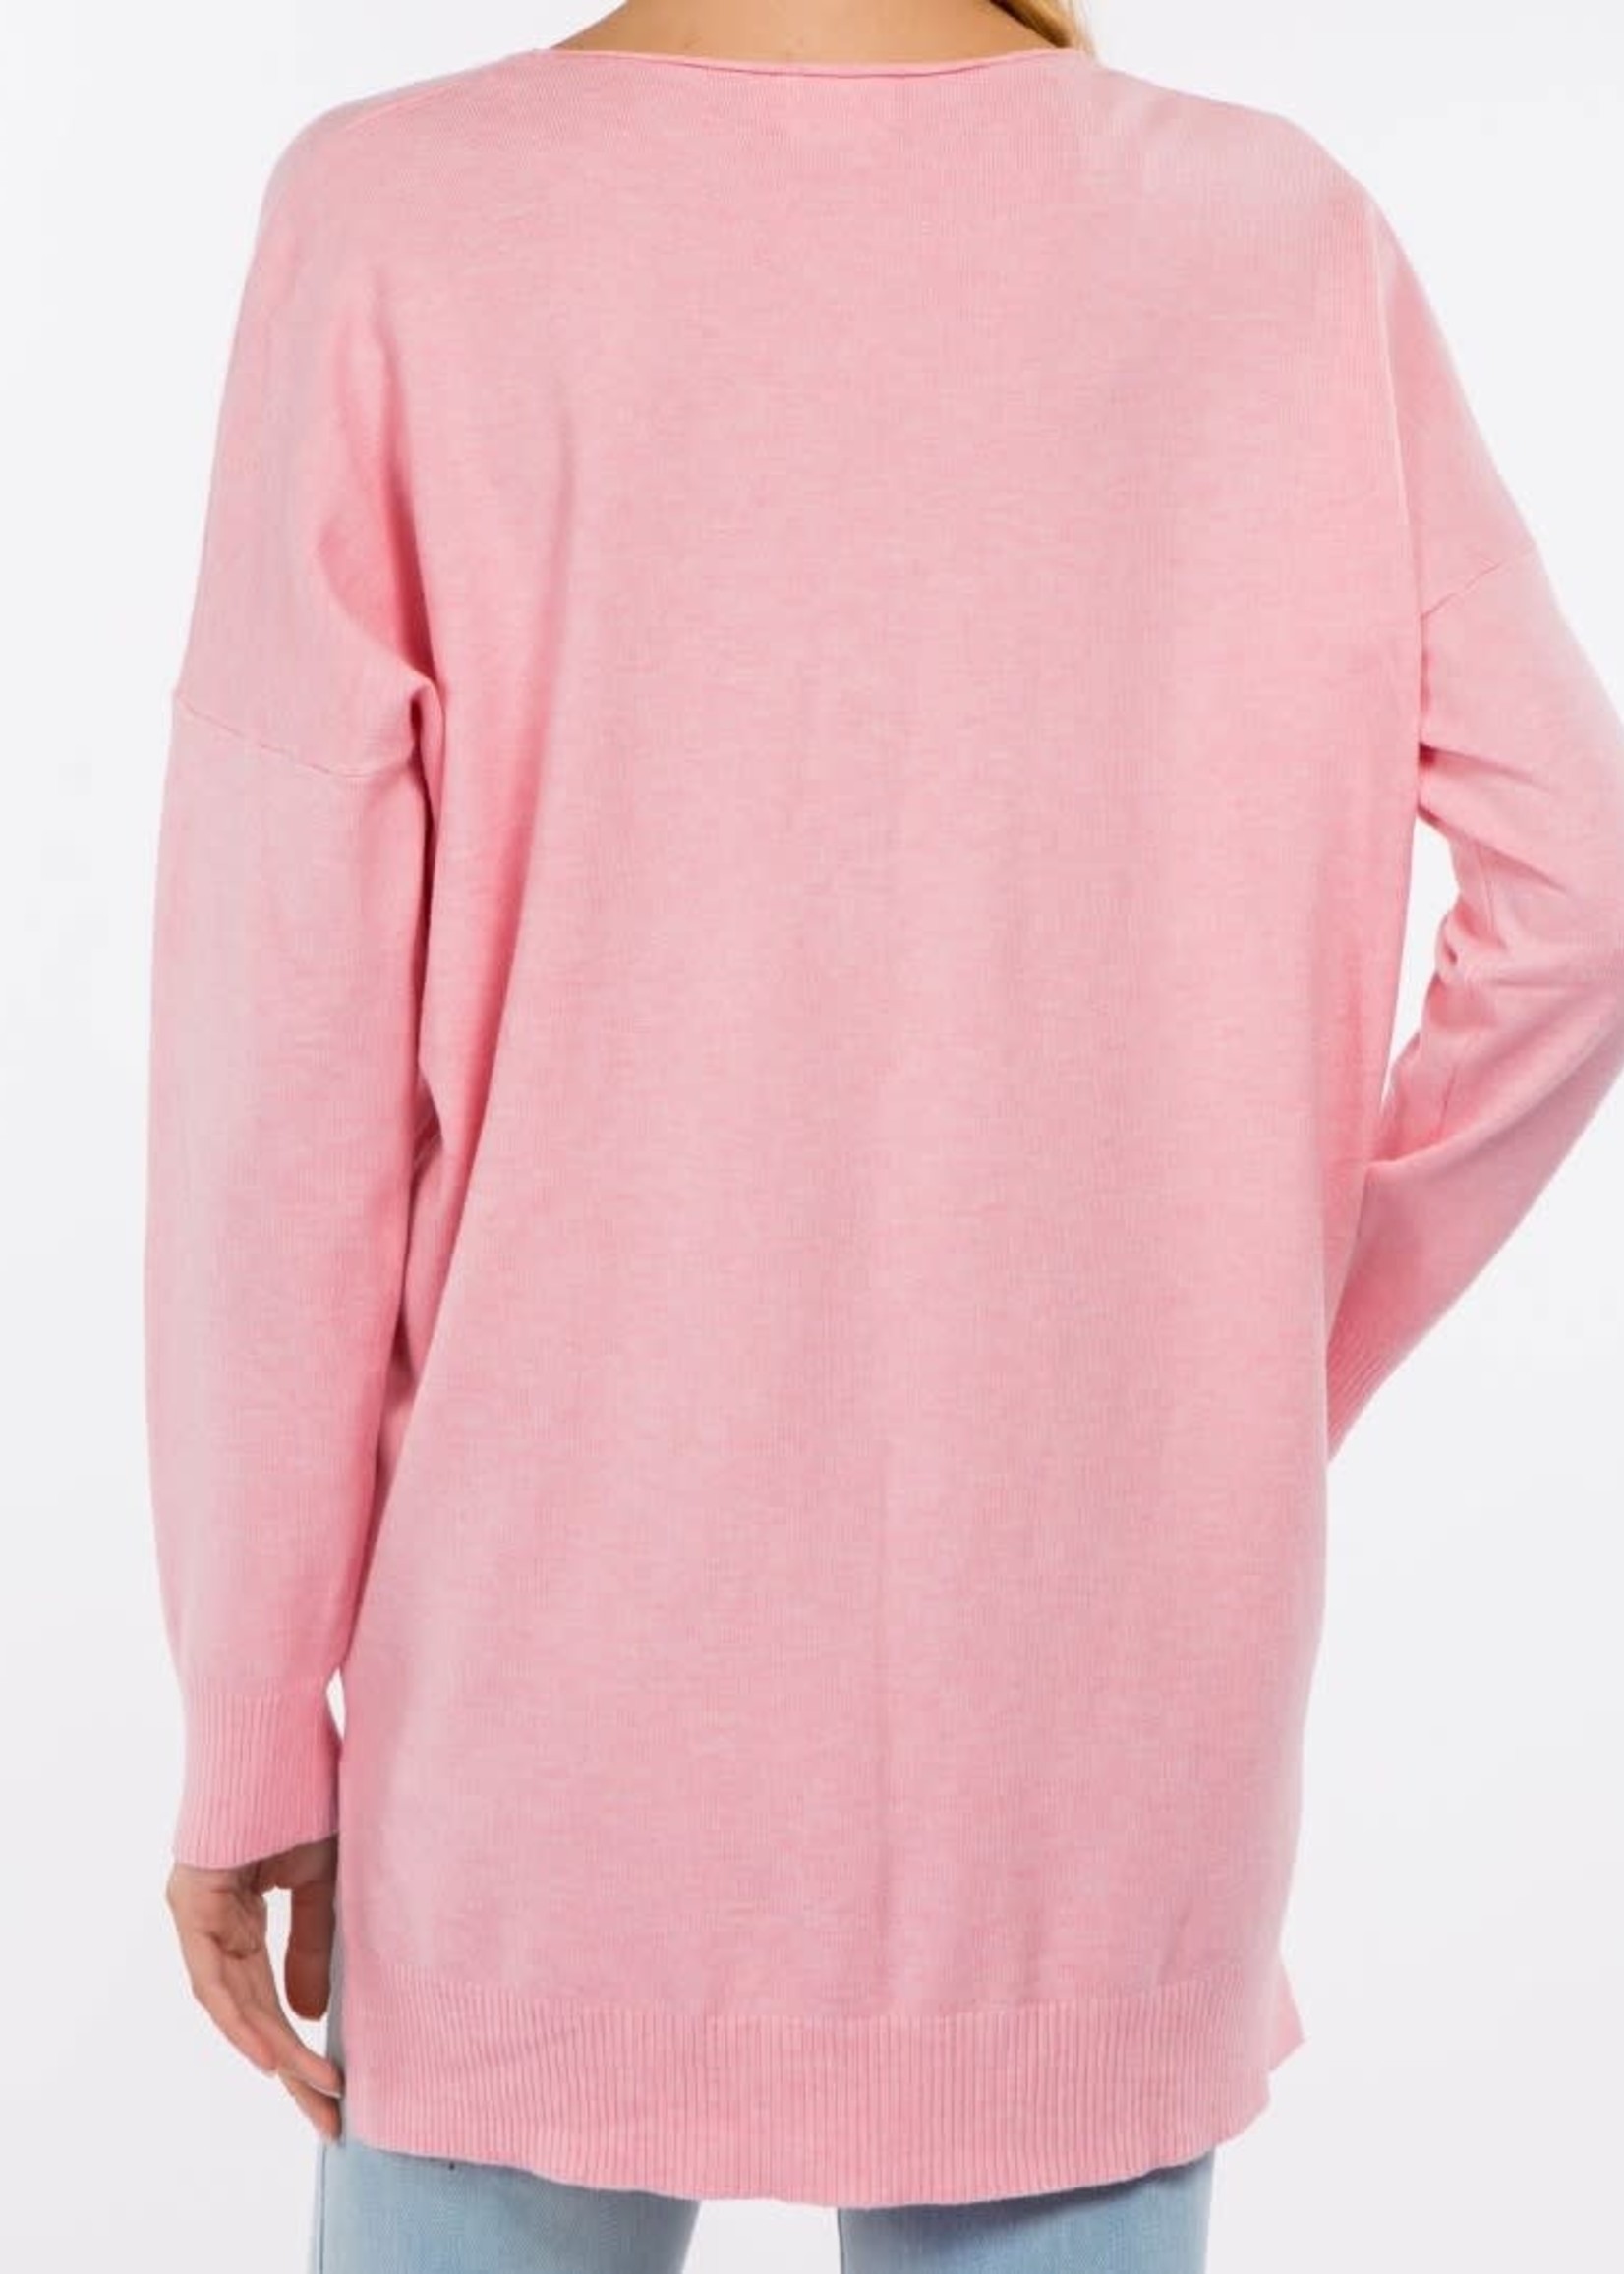 dreamers by debut Pink V-Neck Sweater